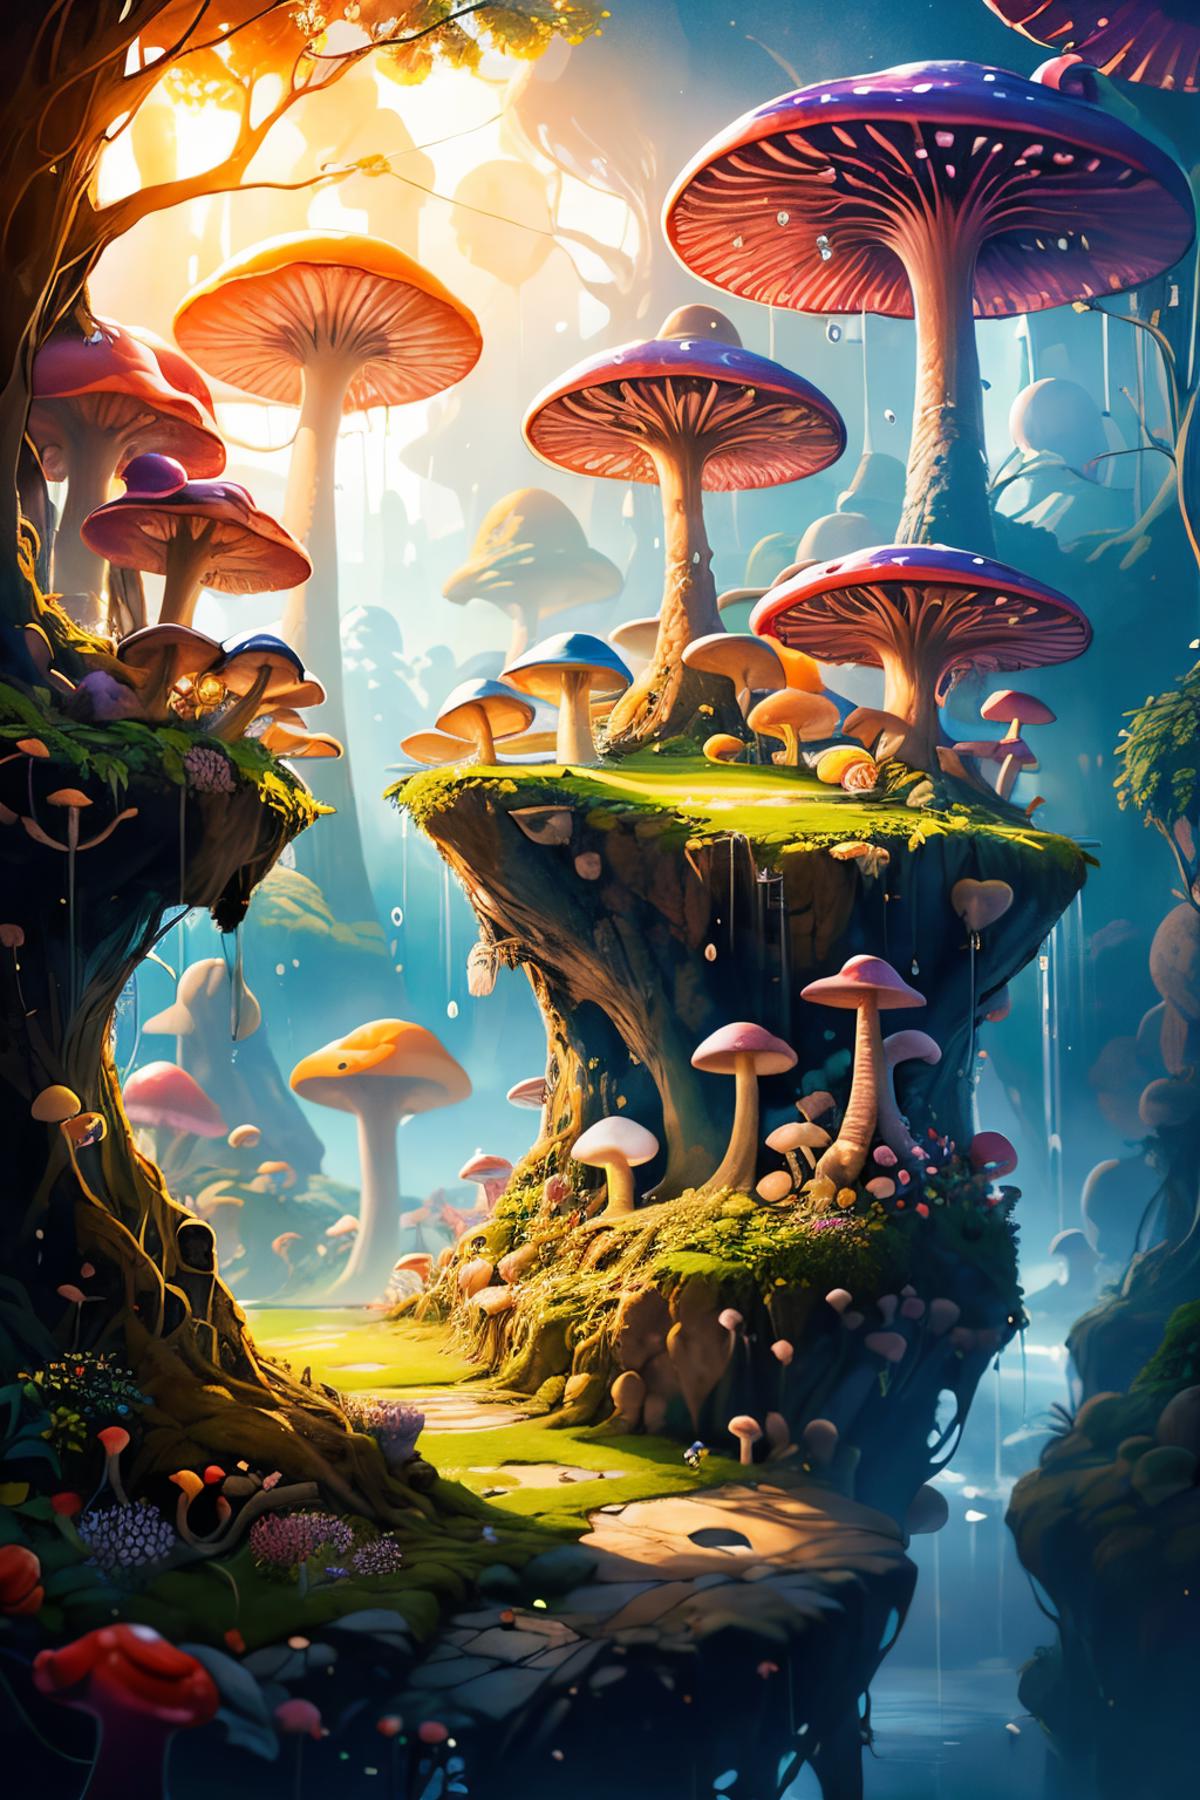 A vibrant, colorful mushroom forest with mushrooms growing on rocks and a blue sky.